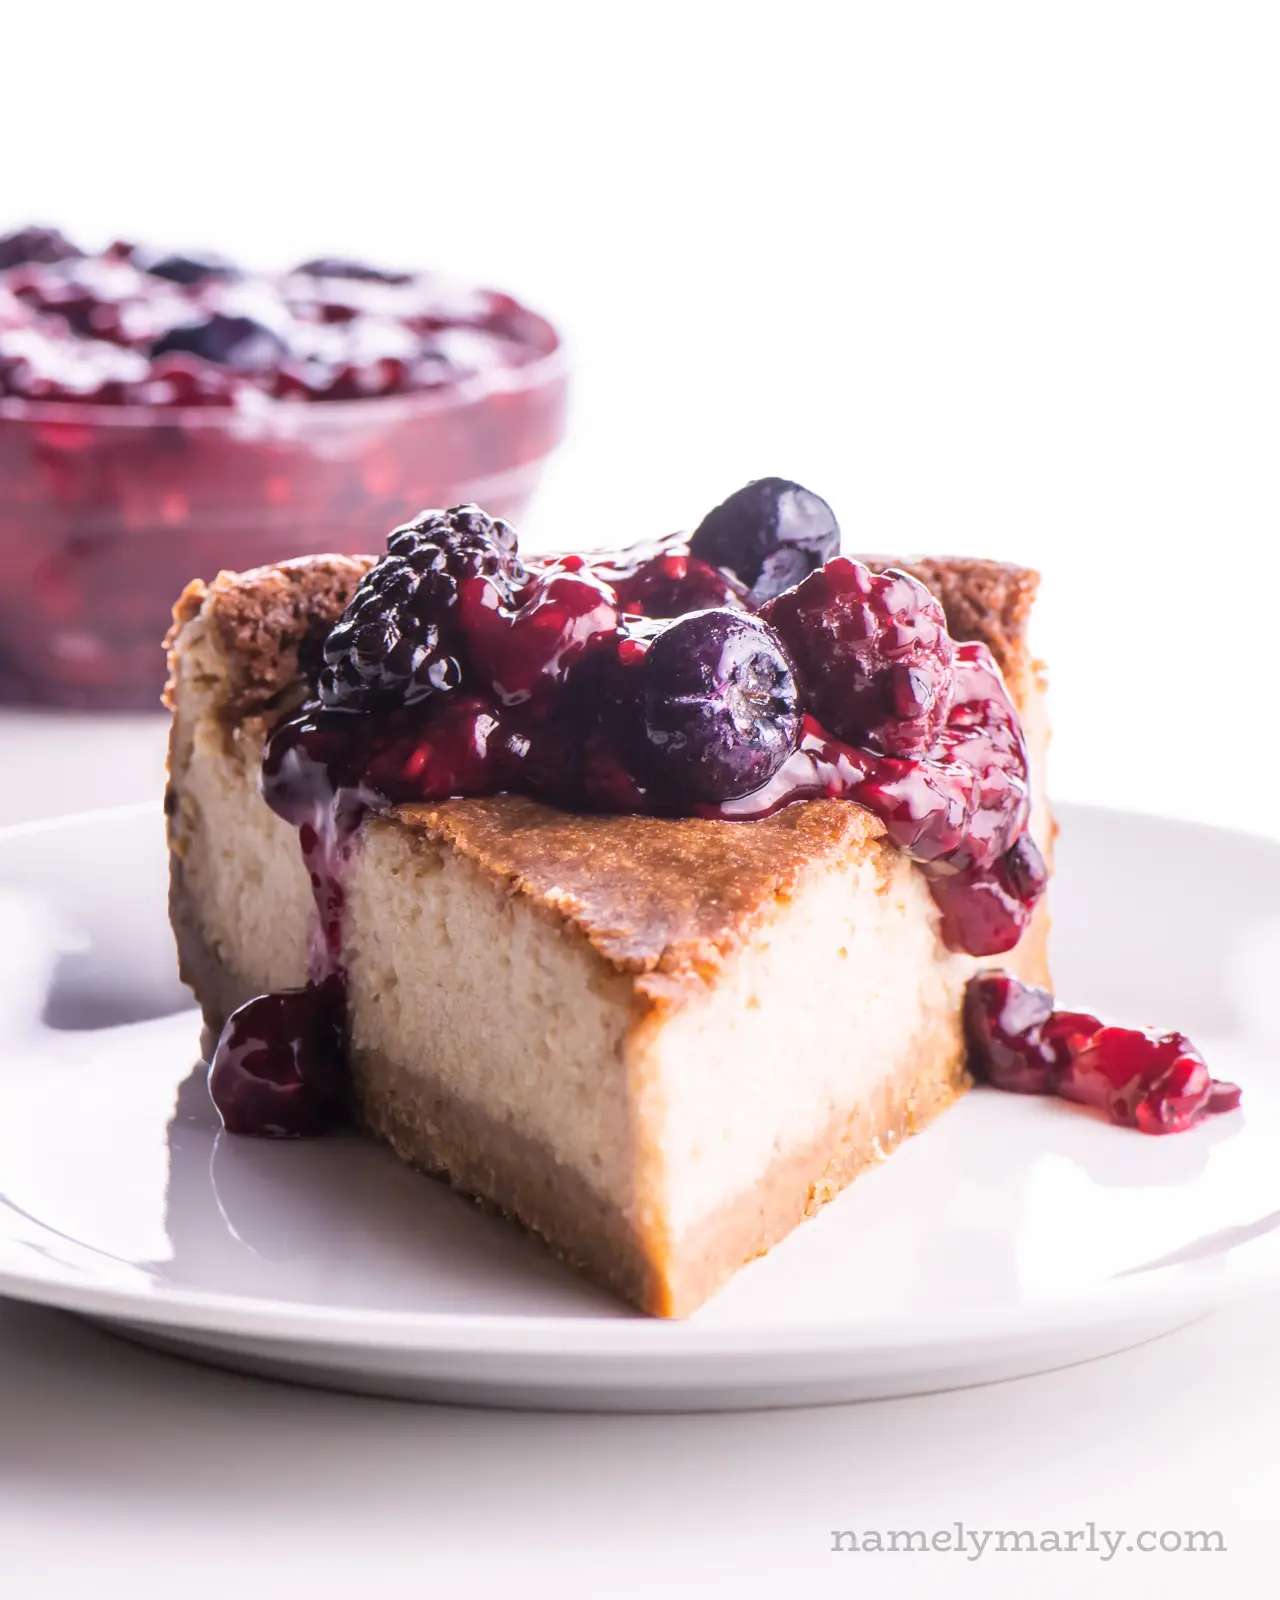 A slice of cheesecake with berry drizzle over the top and more berry topping in a bowl behind it.